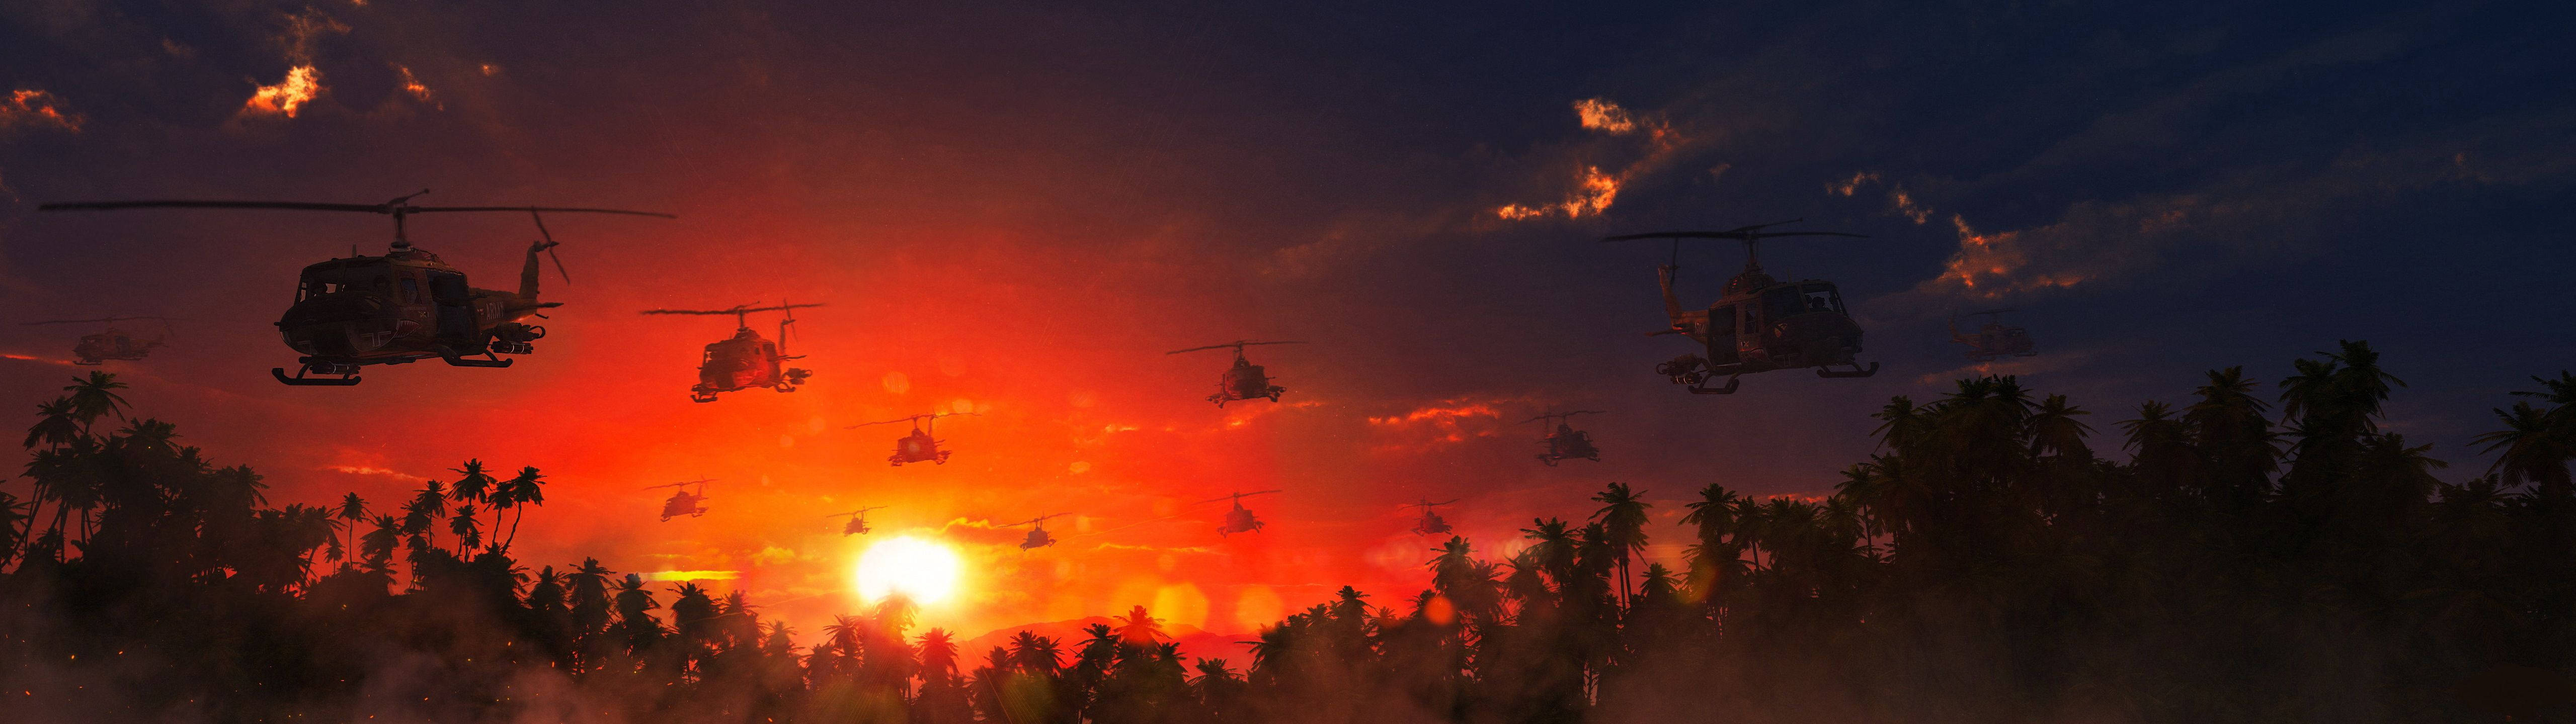 Helicopters In Sunset